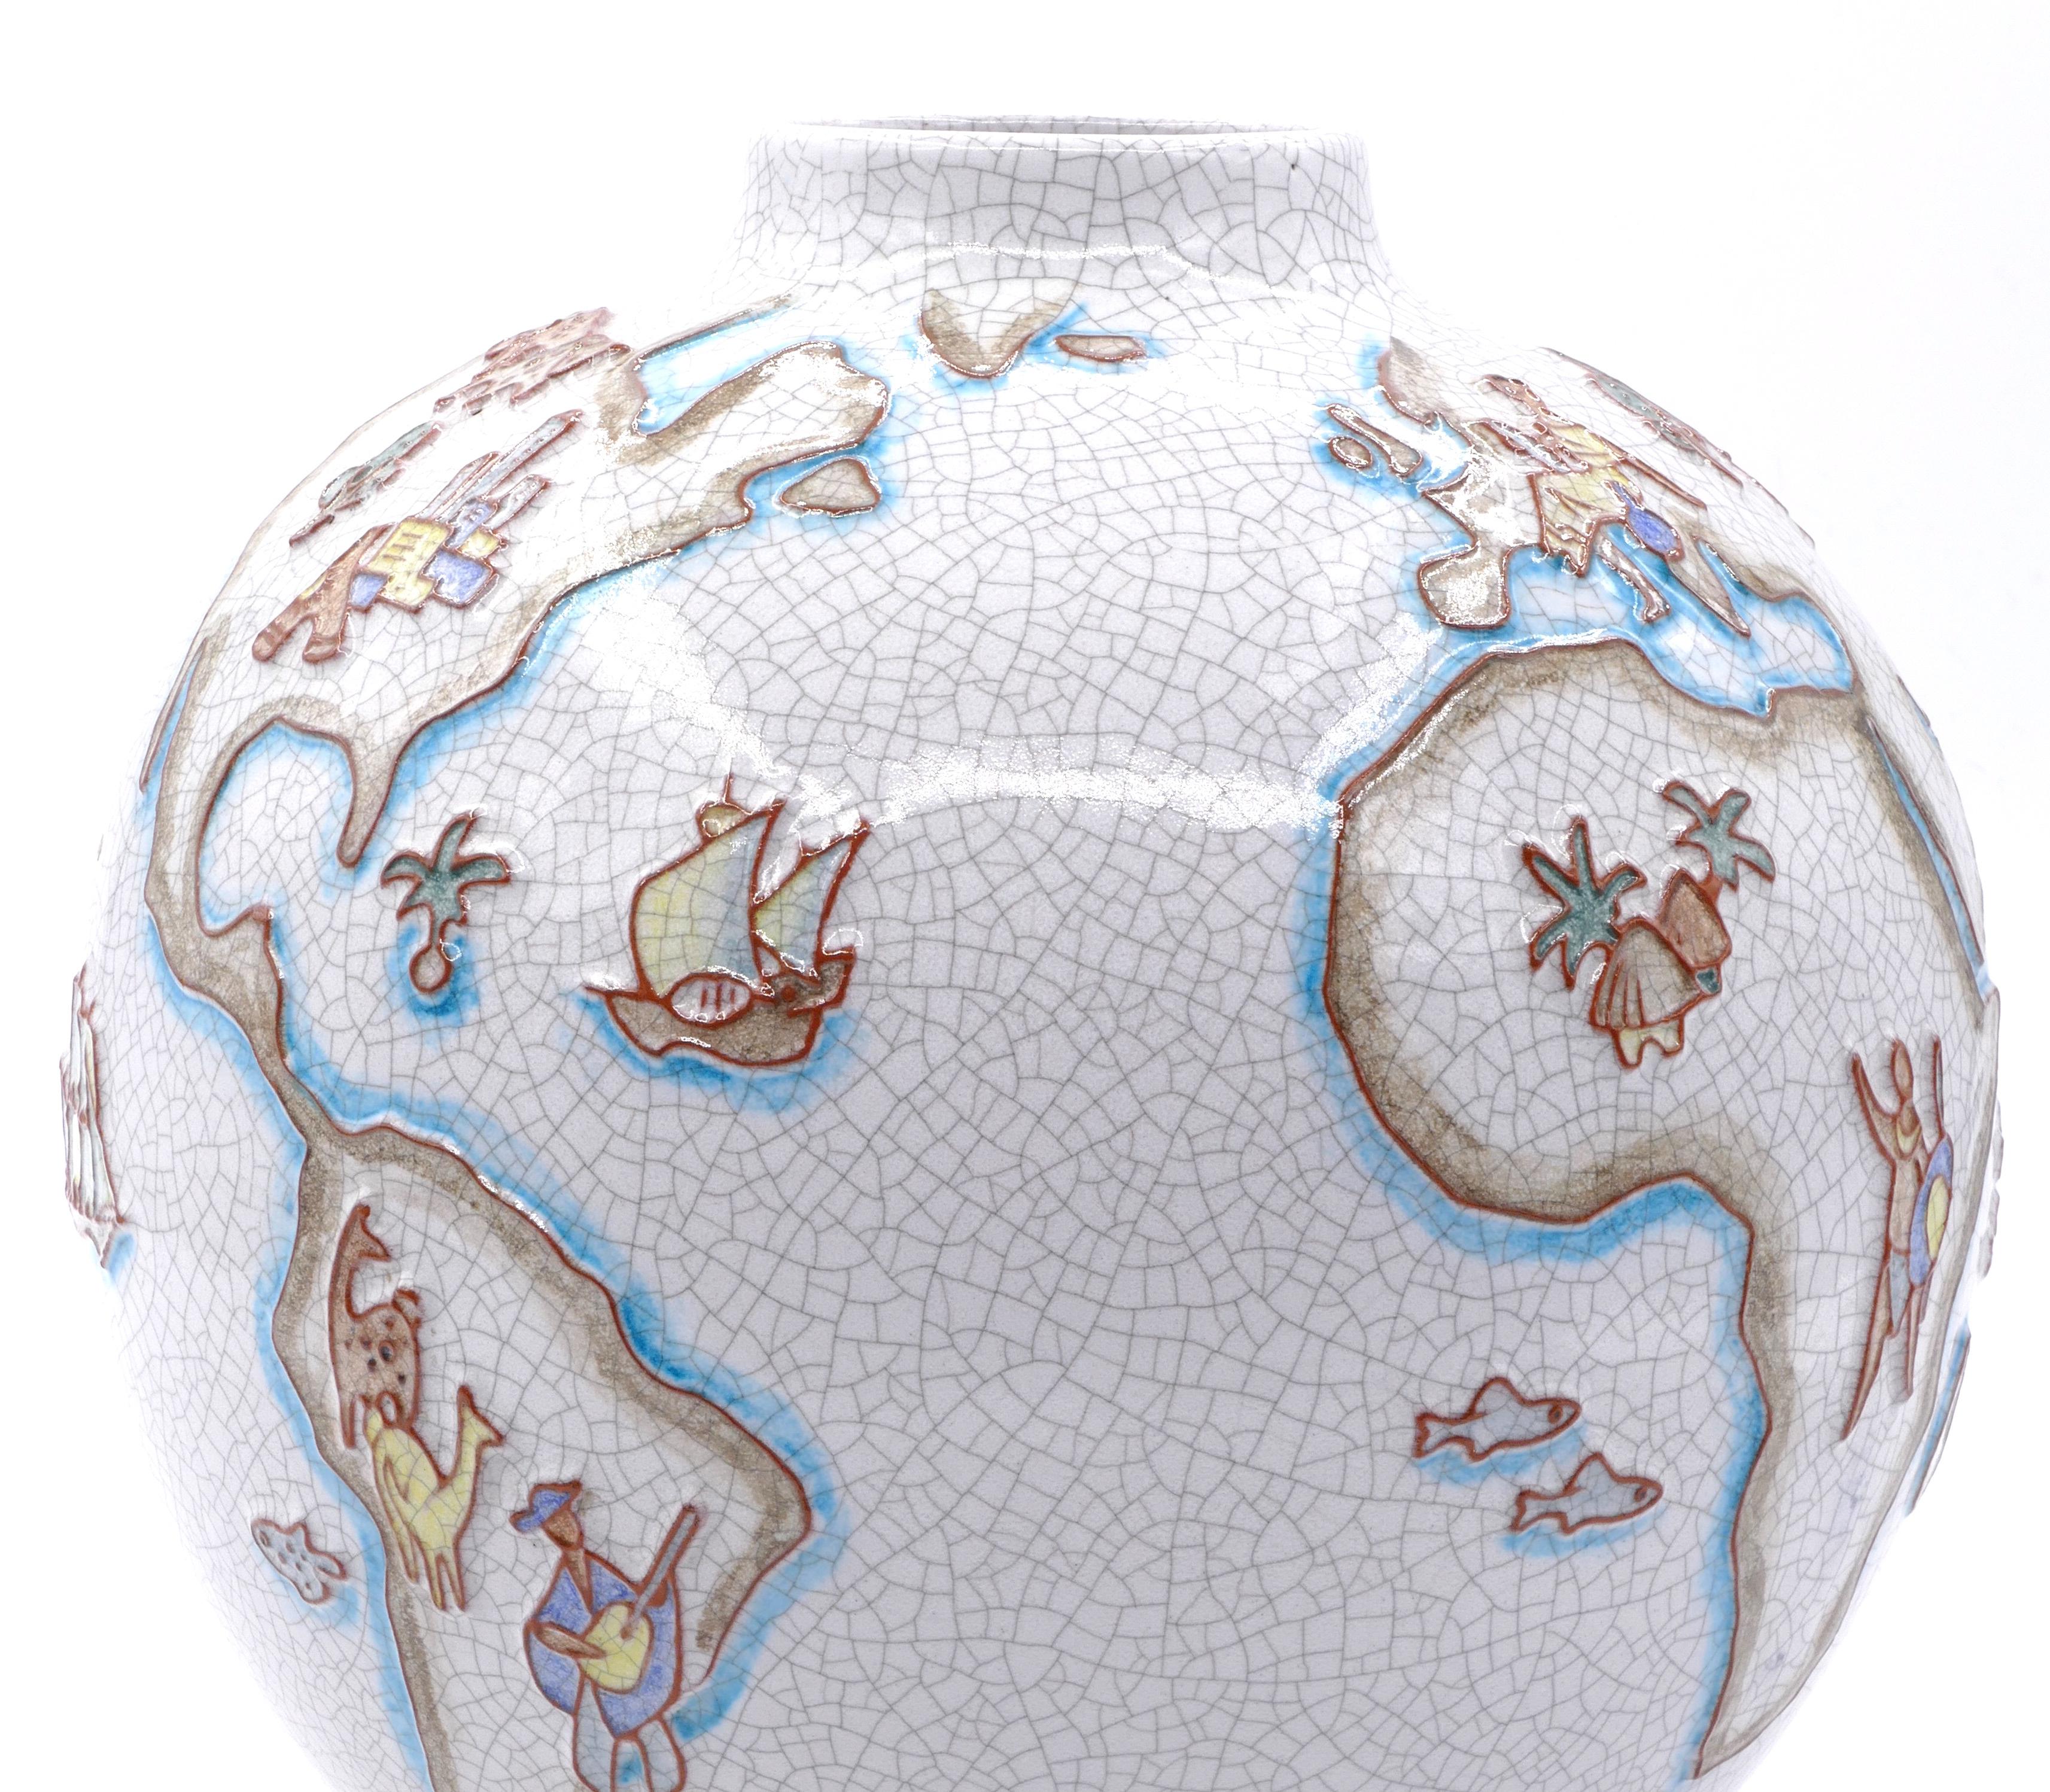 This vase with world map is a wonderful contemporary Majolica vase, realized by the German artist Karl-Heinz Feisst (born in 1925 in Karlsruhe).

The brick-red shards are enameled with gray crackles and decorated with a 